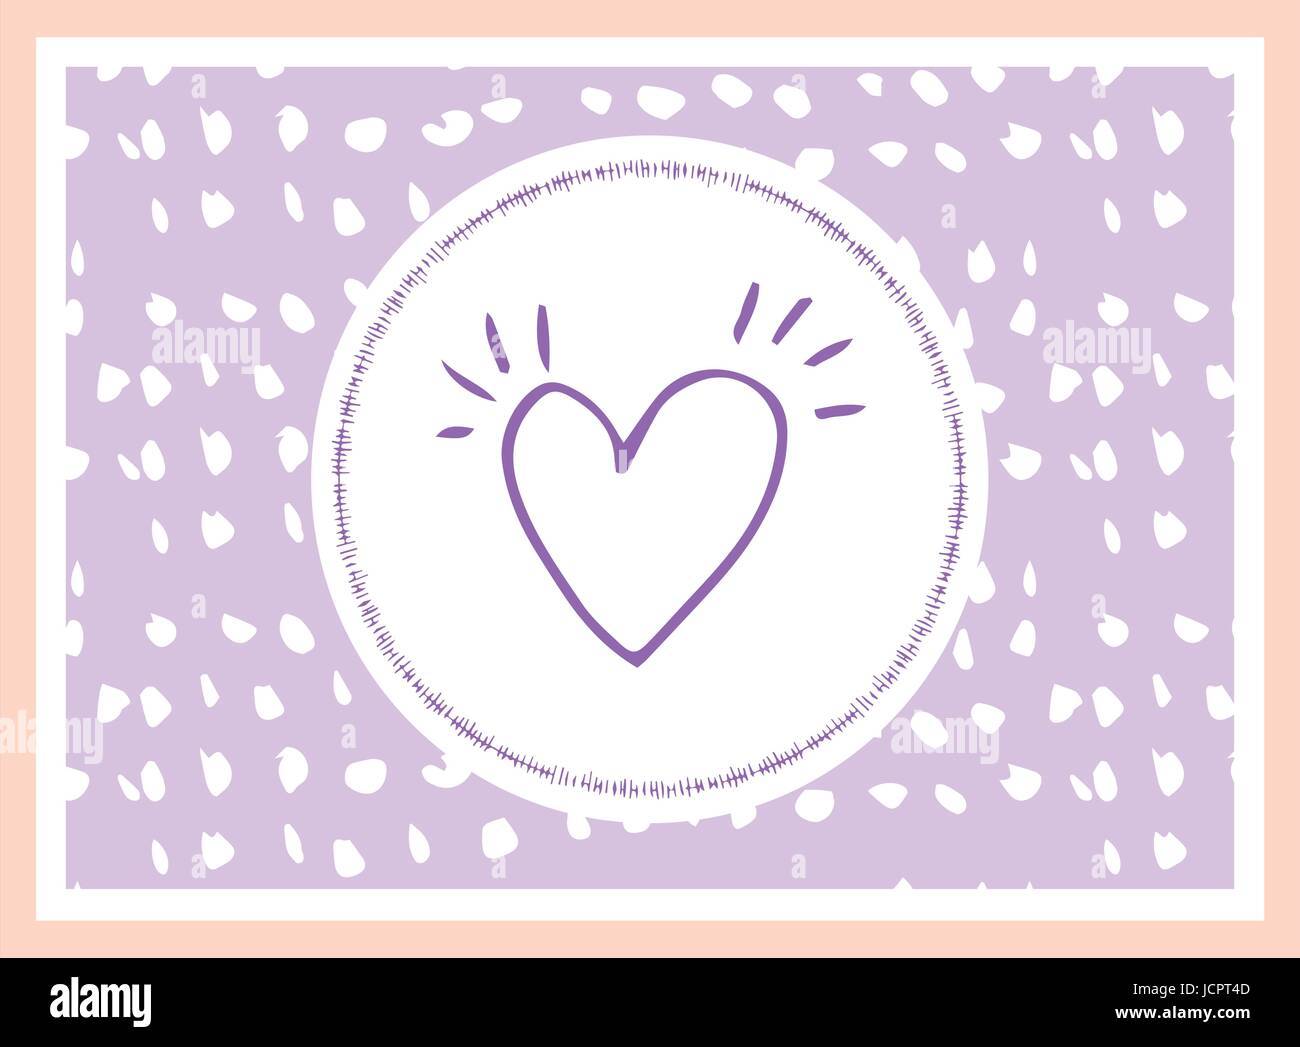 Vector of heart design on greeting card Stock Vector